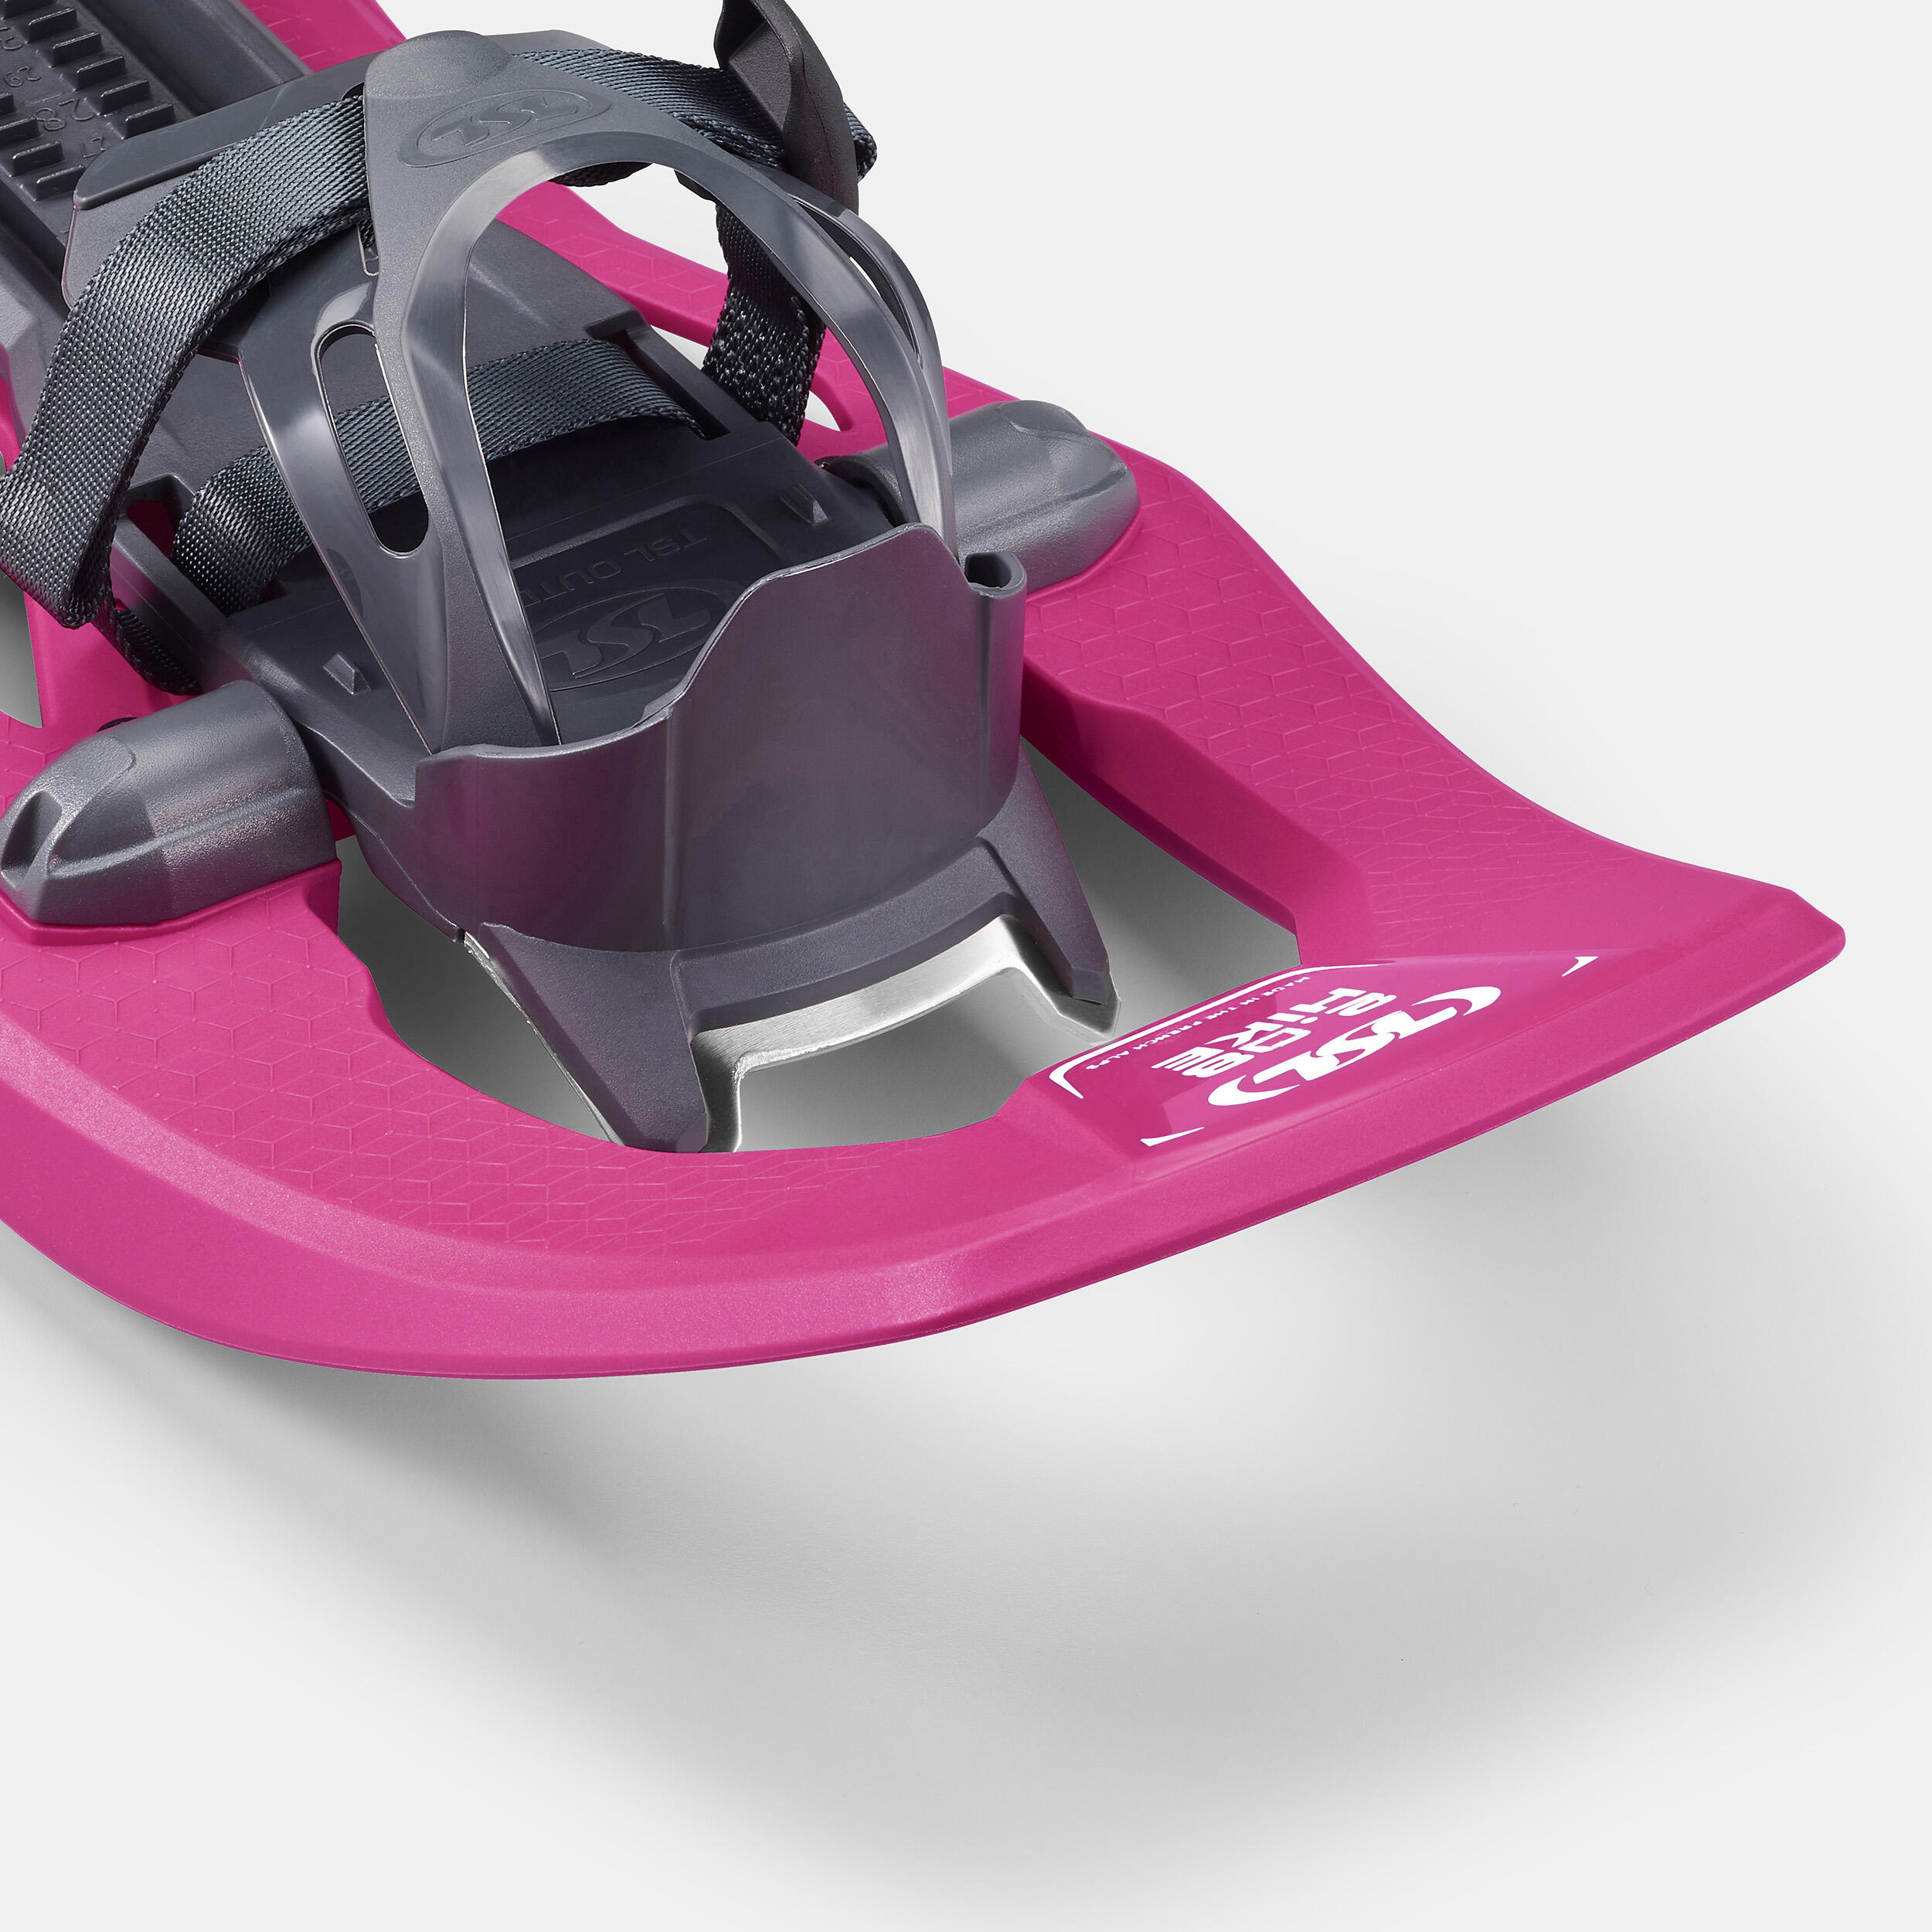 Small Deck Snowshoes - TSL 2.08 HIKE Pink - 7/10